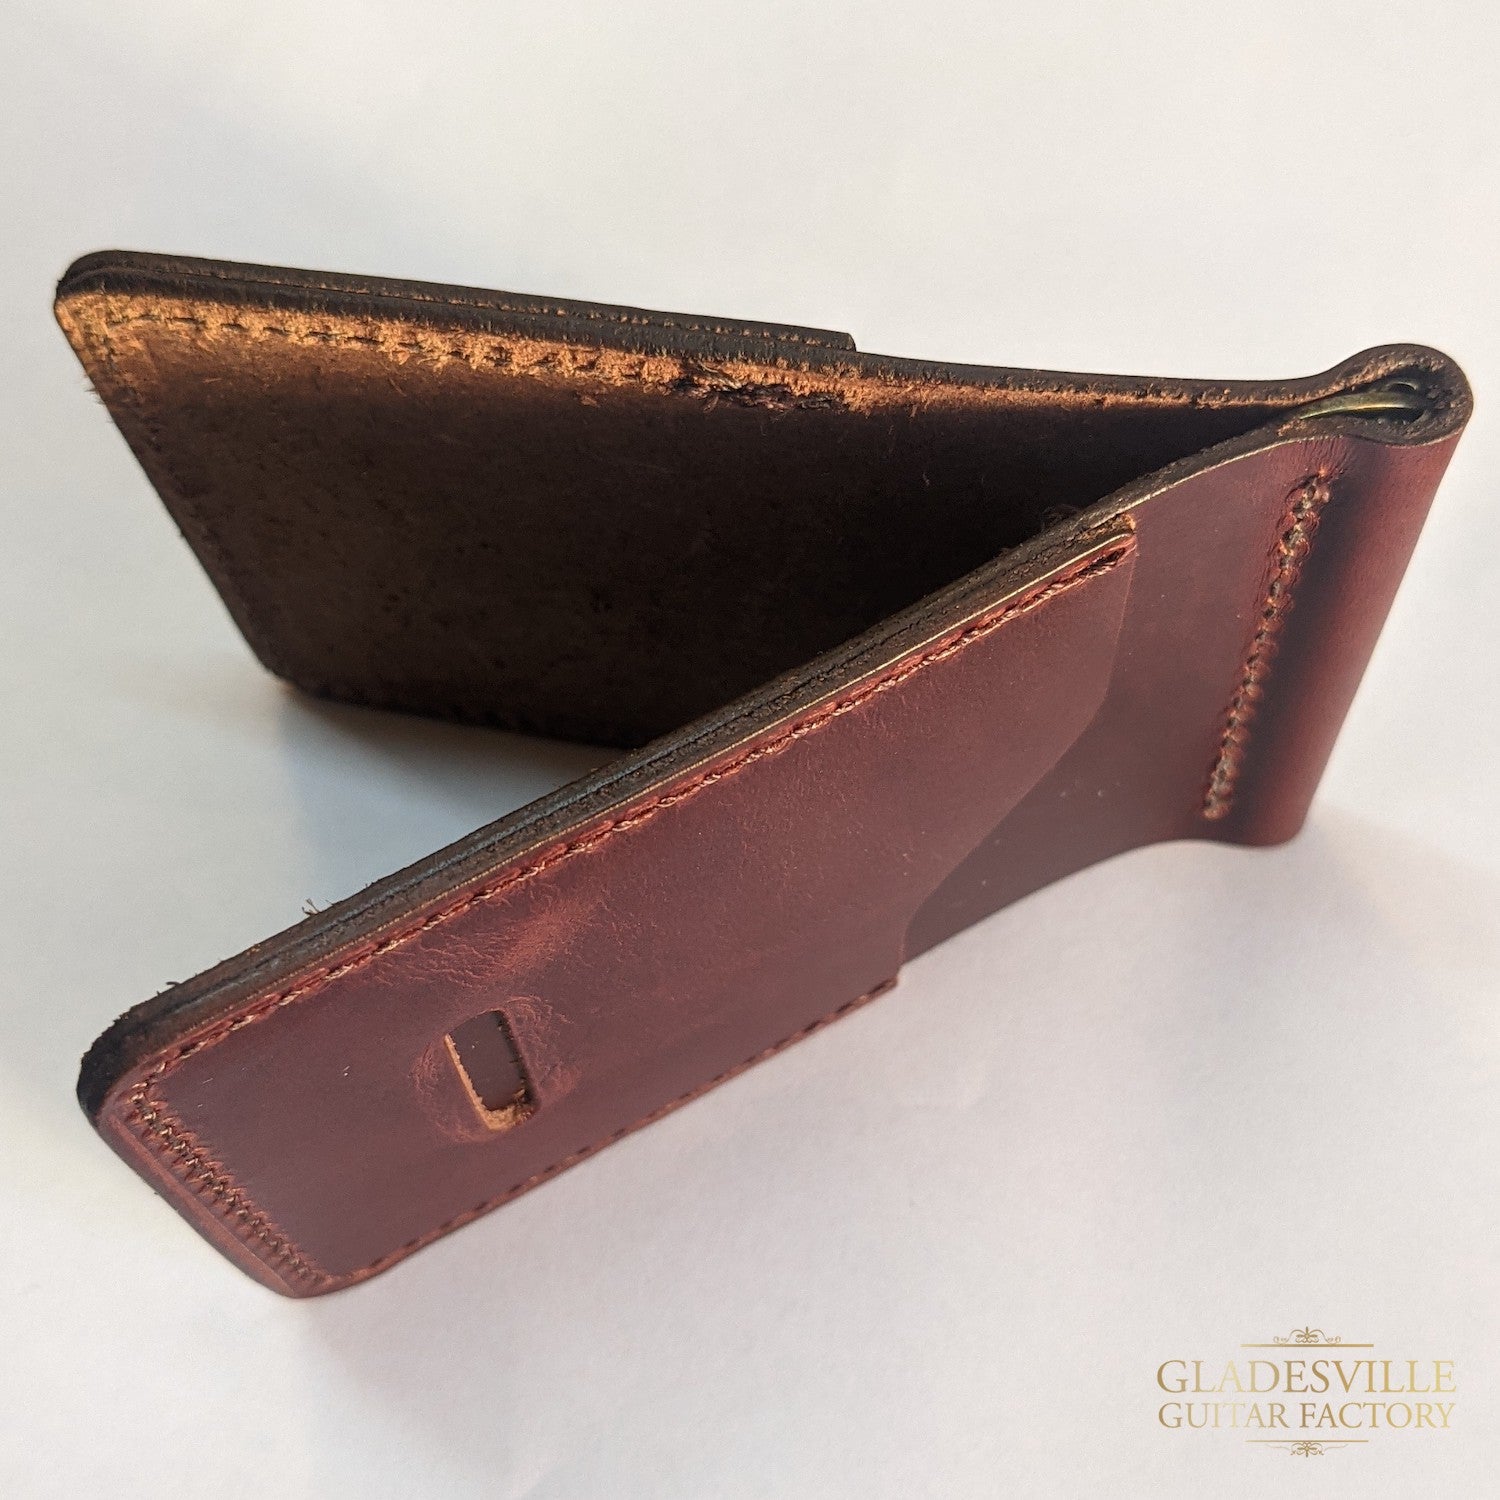 Taylor Mens Wallet - Brown Leather – Gladesville Guitar Factory